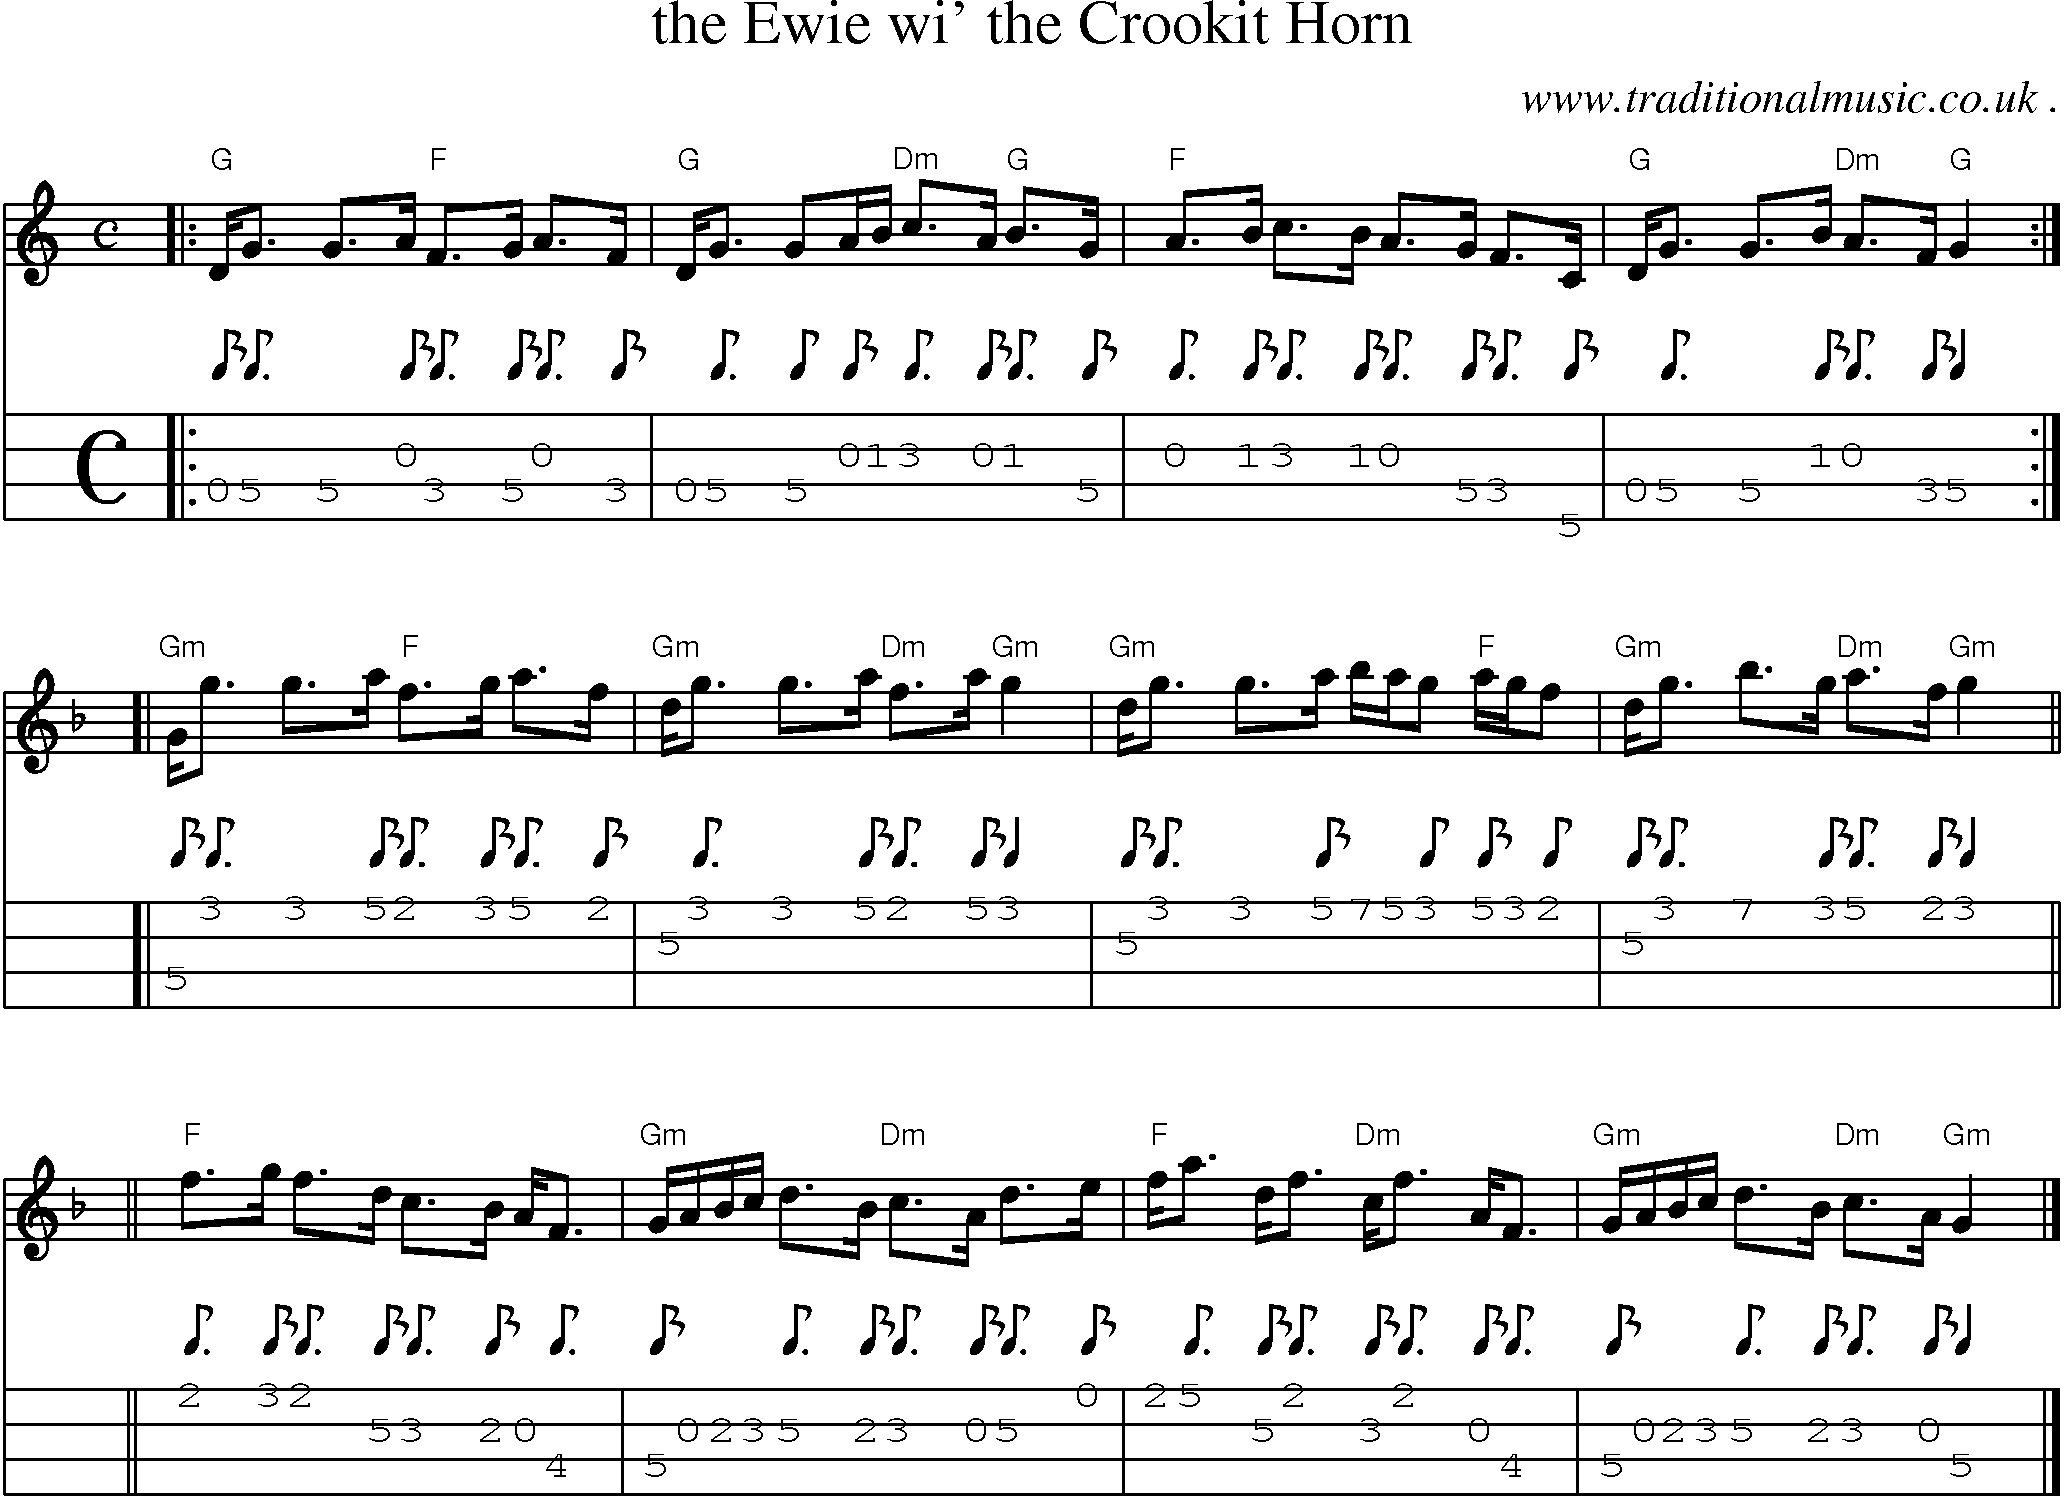 Sheet-music  score, Chords and Mandolin Tabs for The Ewie Wi The Crookit Horn